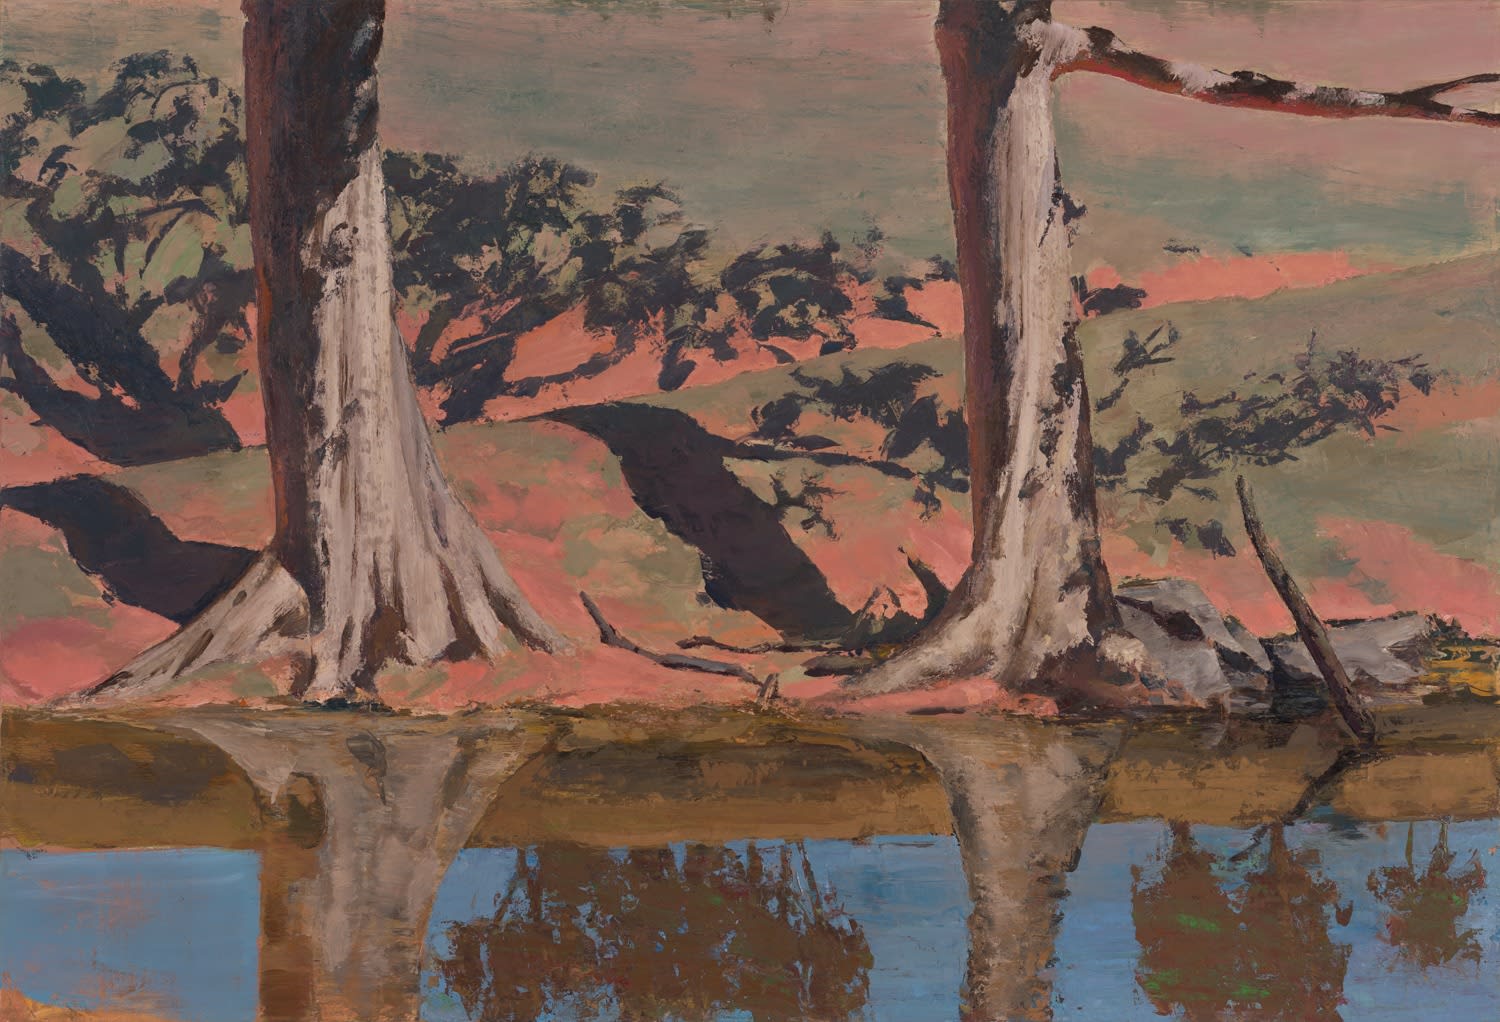 Tony Slater, Creek Bank with Cutting, 2011